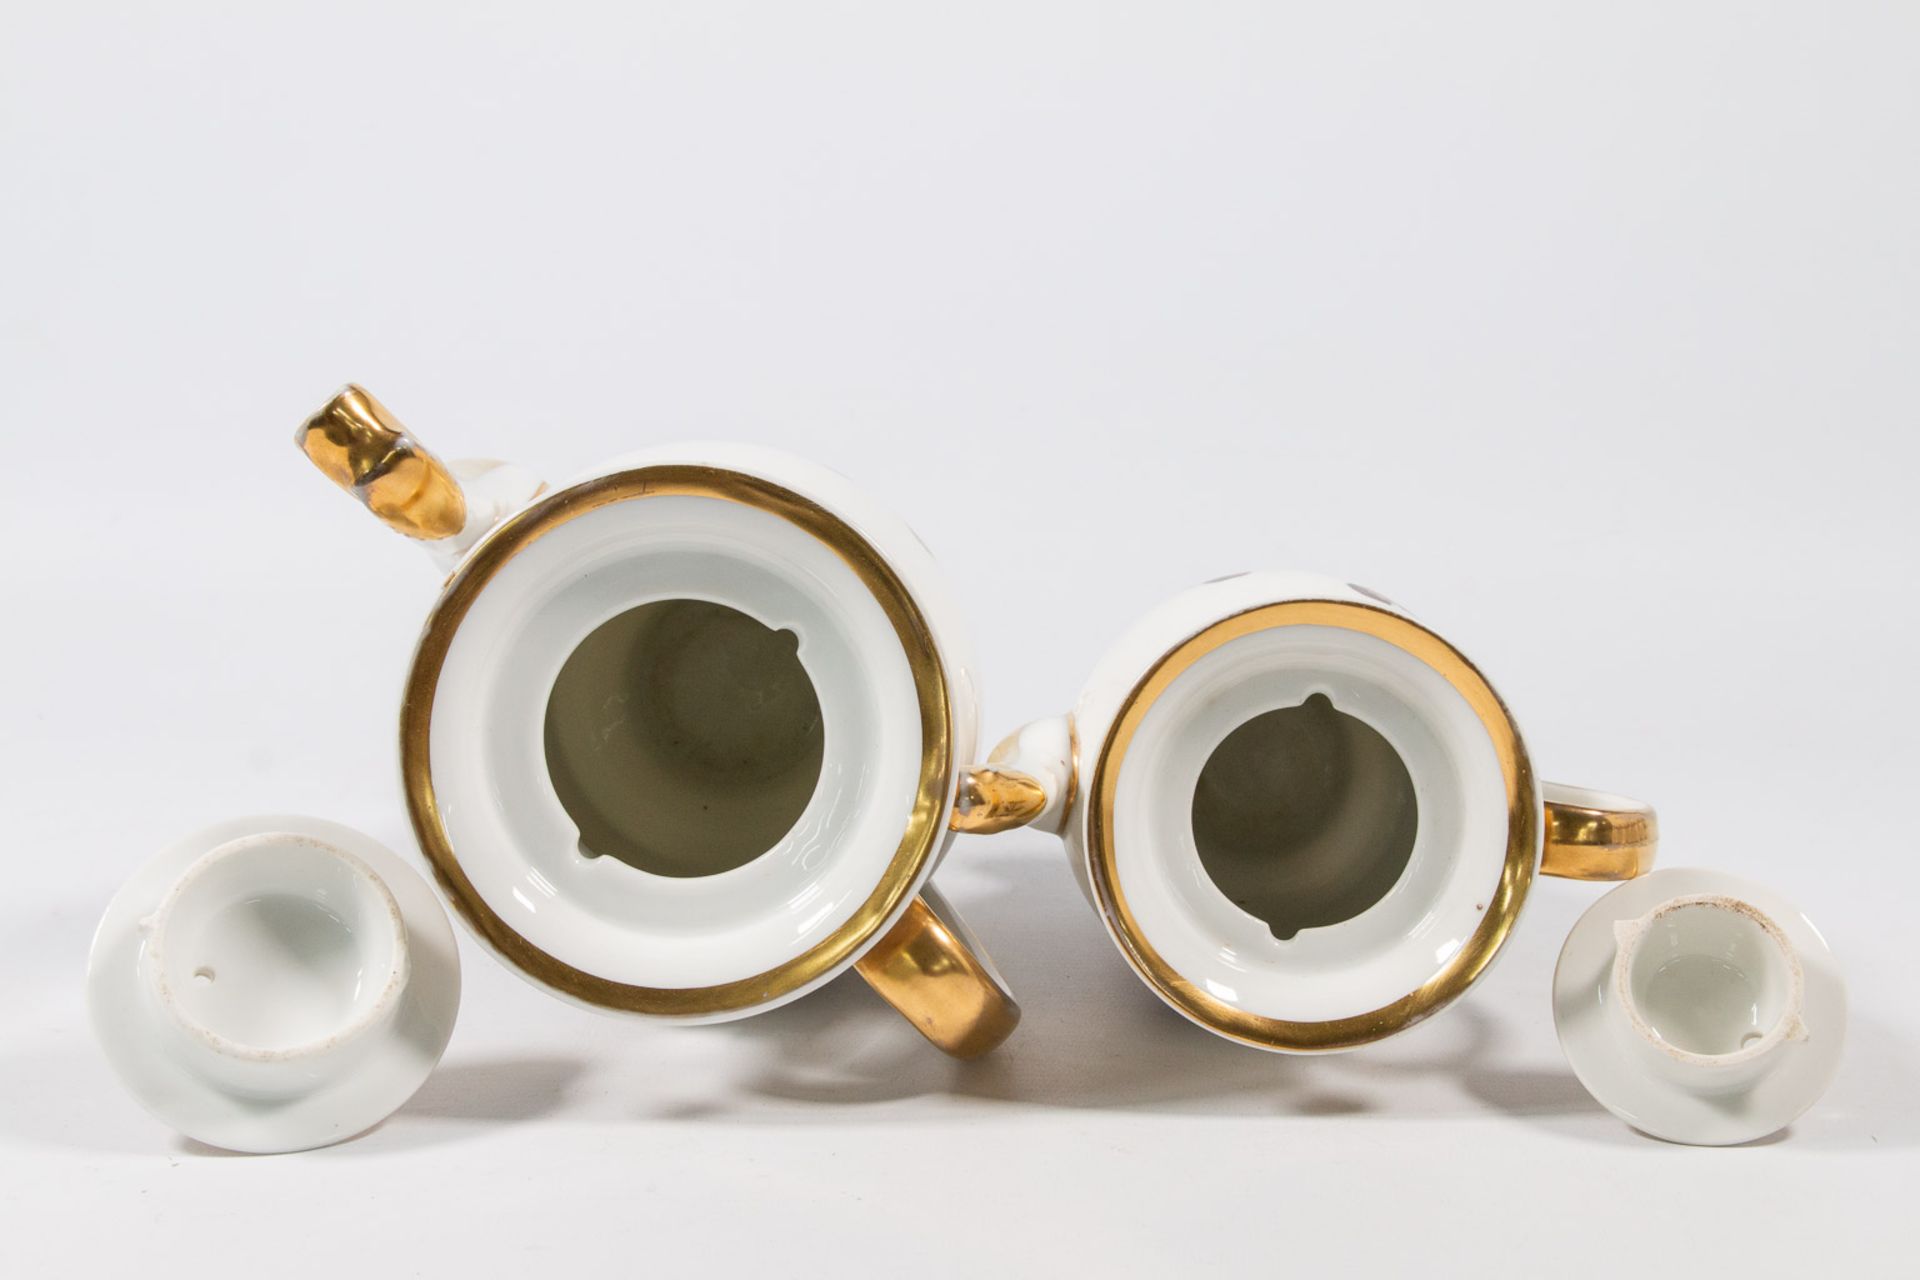 A Complete 'Vieux Bruxelles' coffee and tea service made of porcelain. - Image 24 of 53